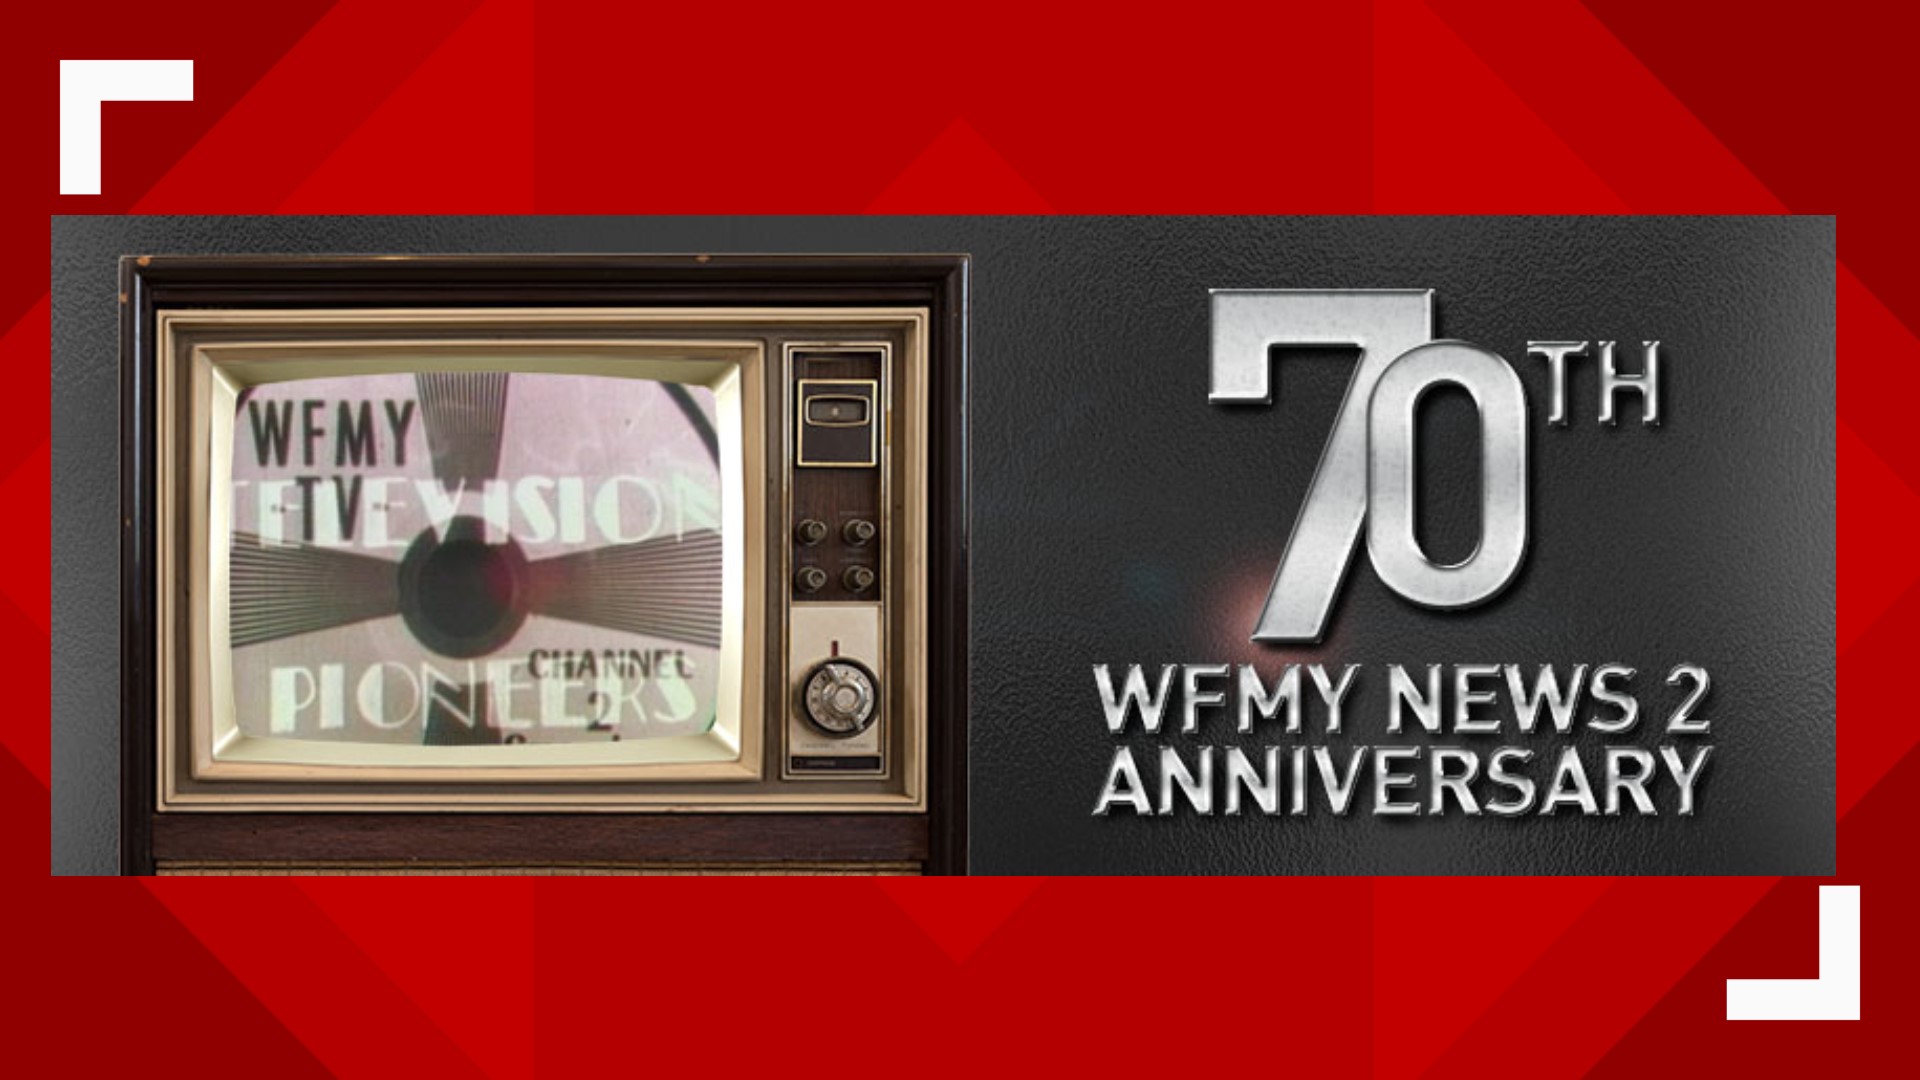 In August 1949, what would become known as WFMY-TV transmitted picture and sound, a first in the Piedmont. WFMY would later deliver the first ‘live’ broadcast in North Carolina.